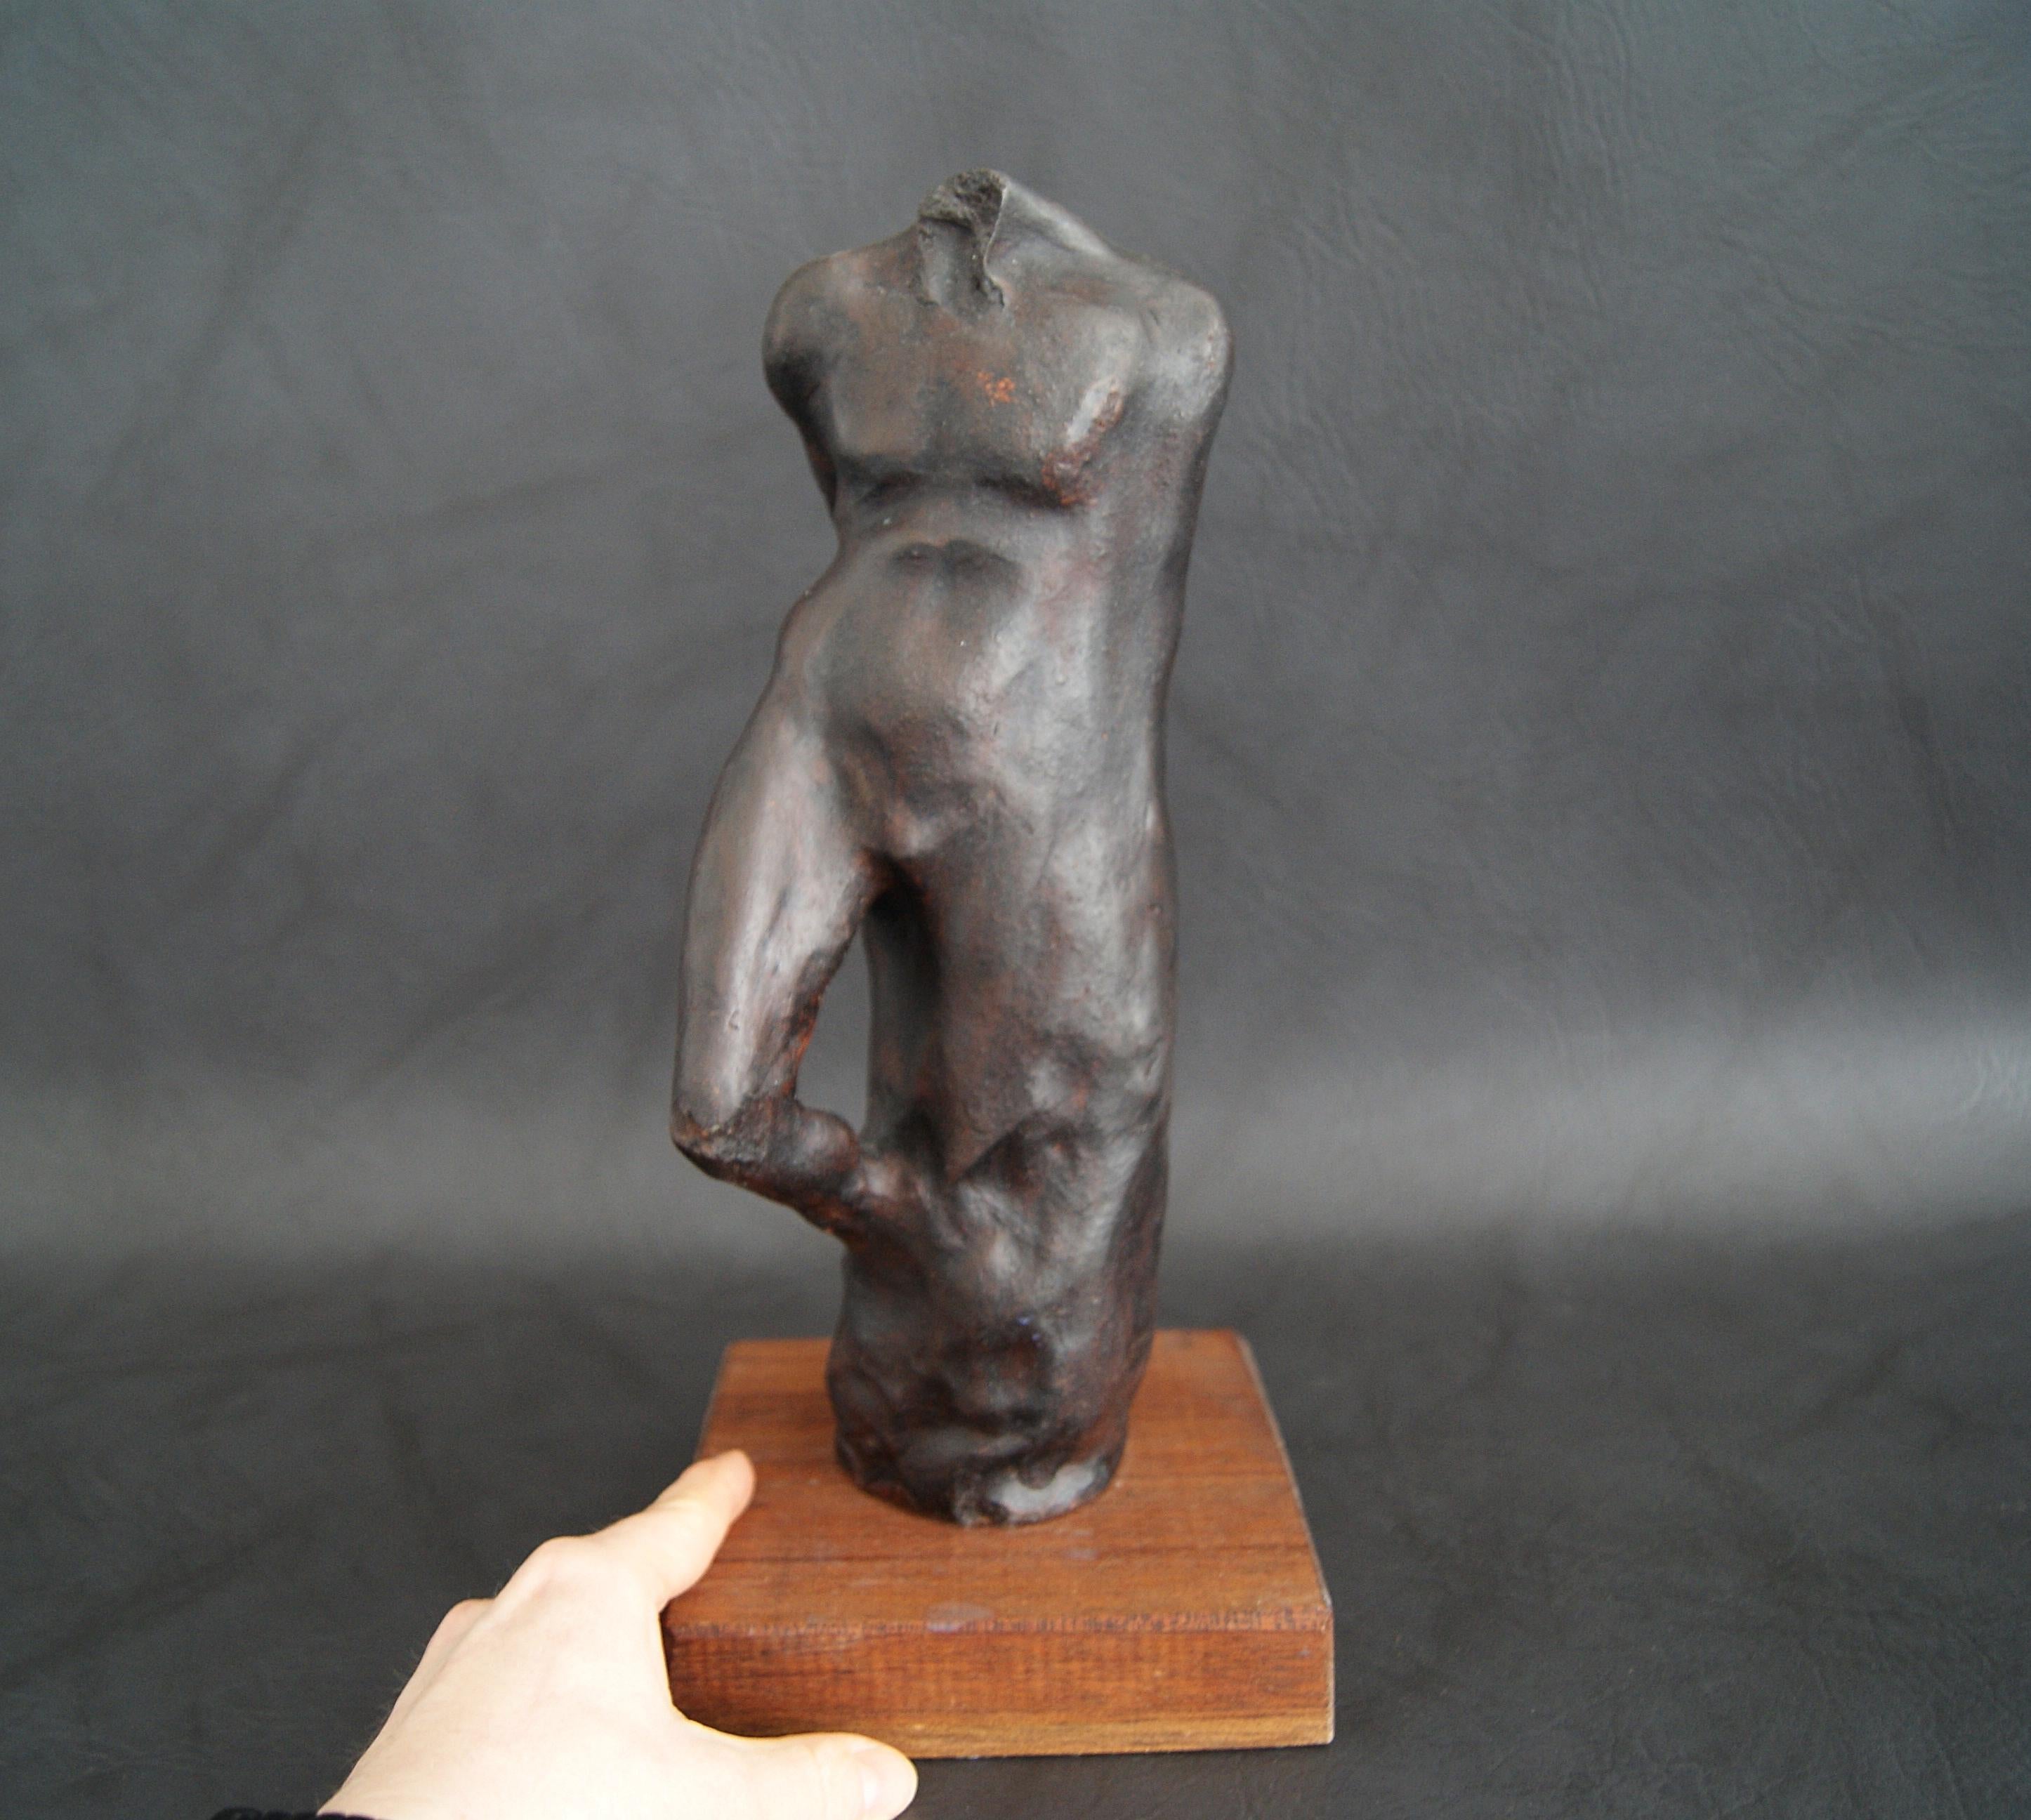 Handmade plaster figure with patinated bronze on a wooden base. The sculpture is by the German artist TADÄUS from the series formless body shapes from 2002. A very decorative individual piece that invites you to interpret. The natural materials and